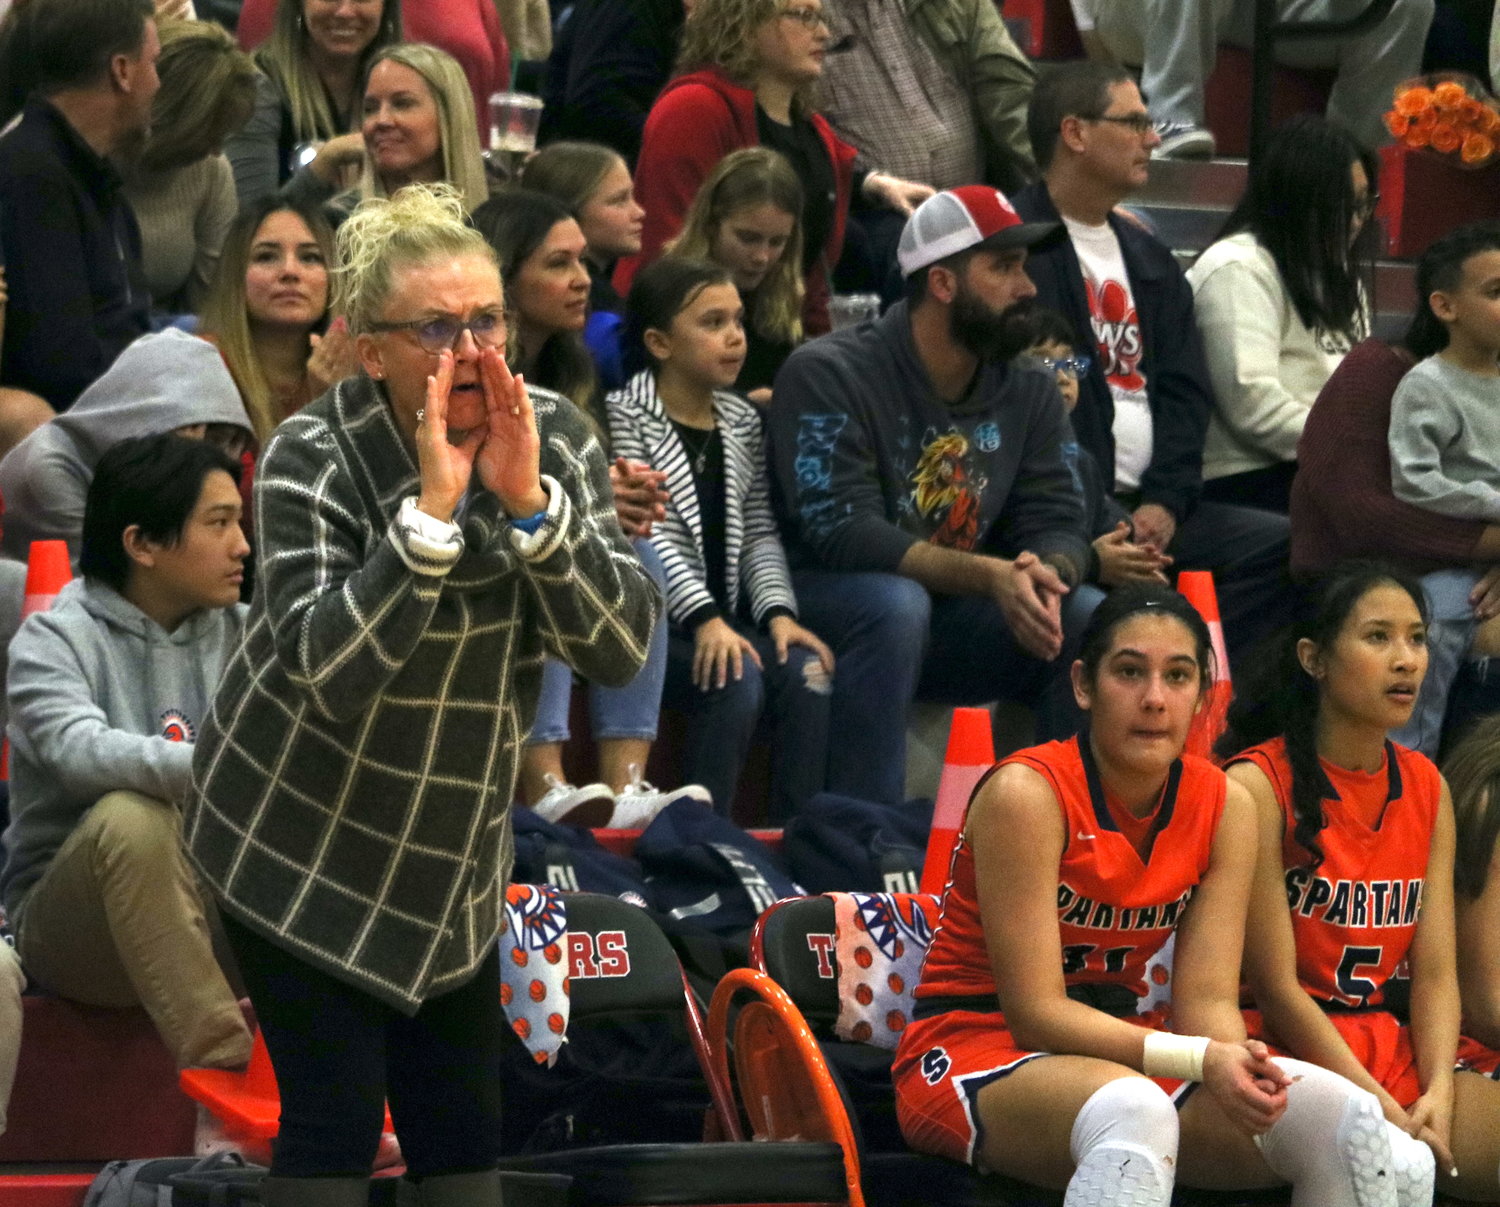 Seven Lakes head coach Angela Spurlock talks to her team during Friday's game between Seven Lakes and Katy at the Katy gym.